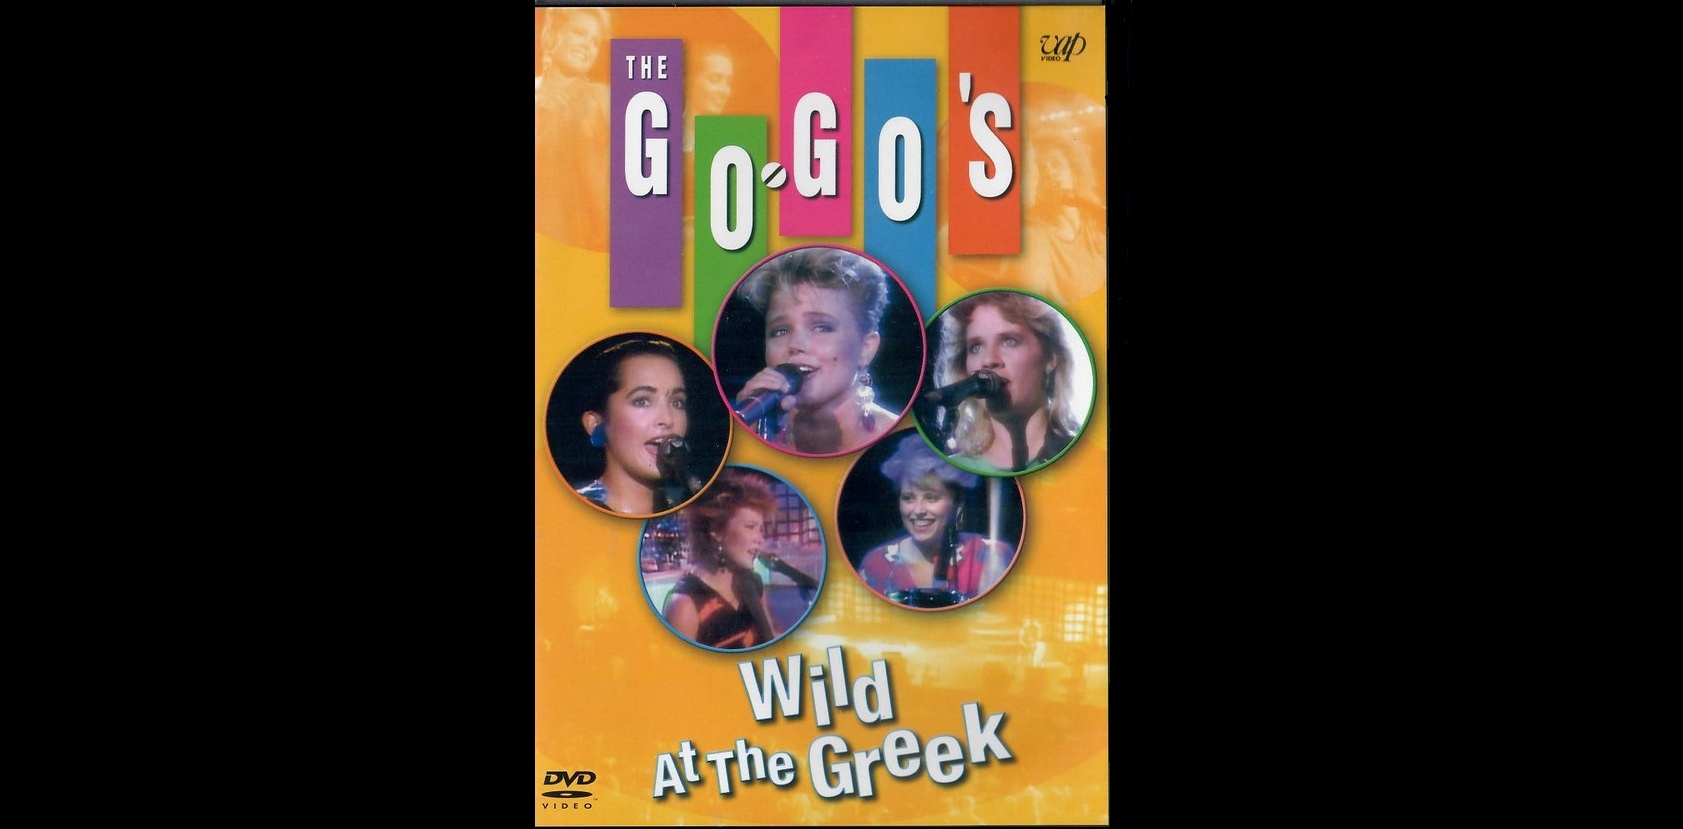 Re-Live The 80’s By Watching This Full Concert By The Go-Go’s from 1984